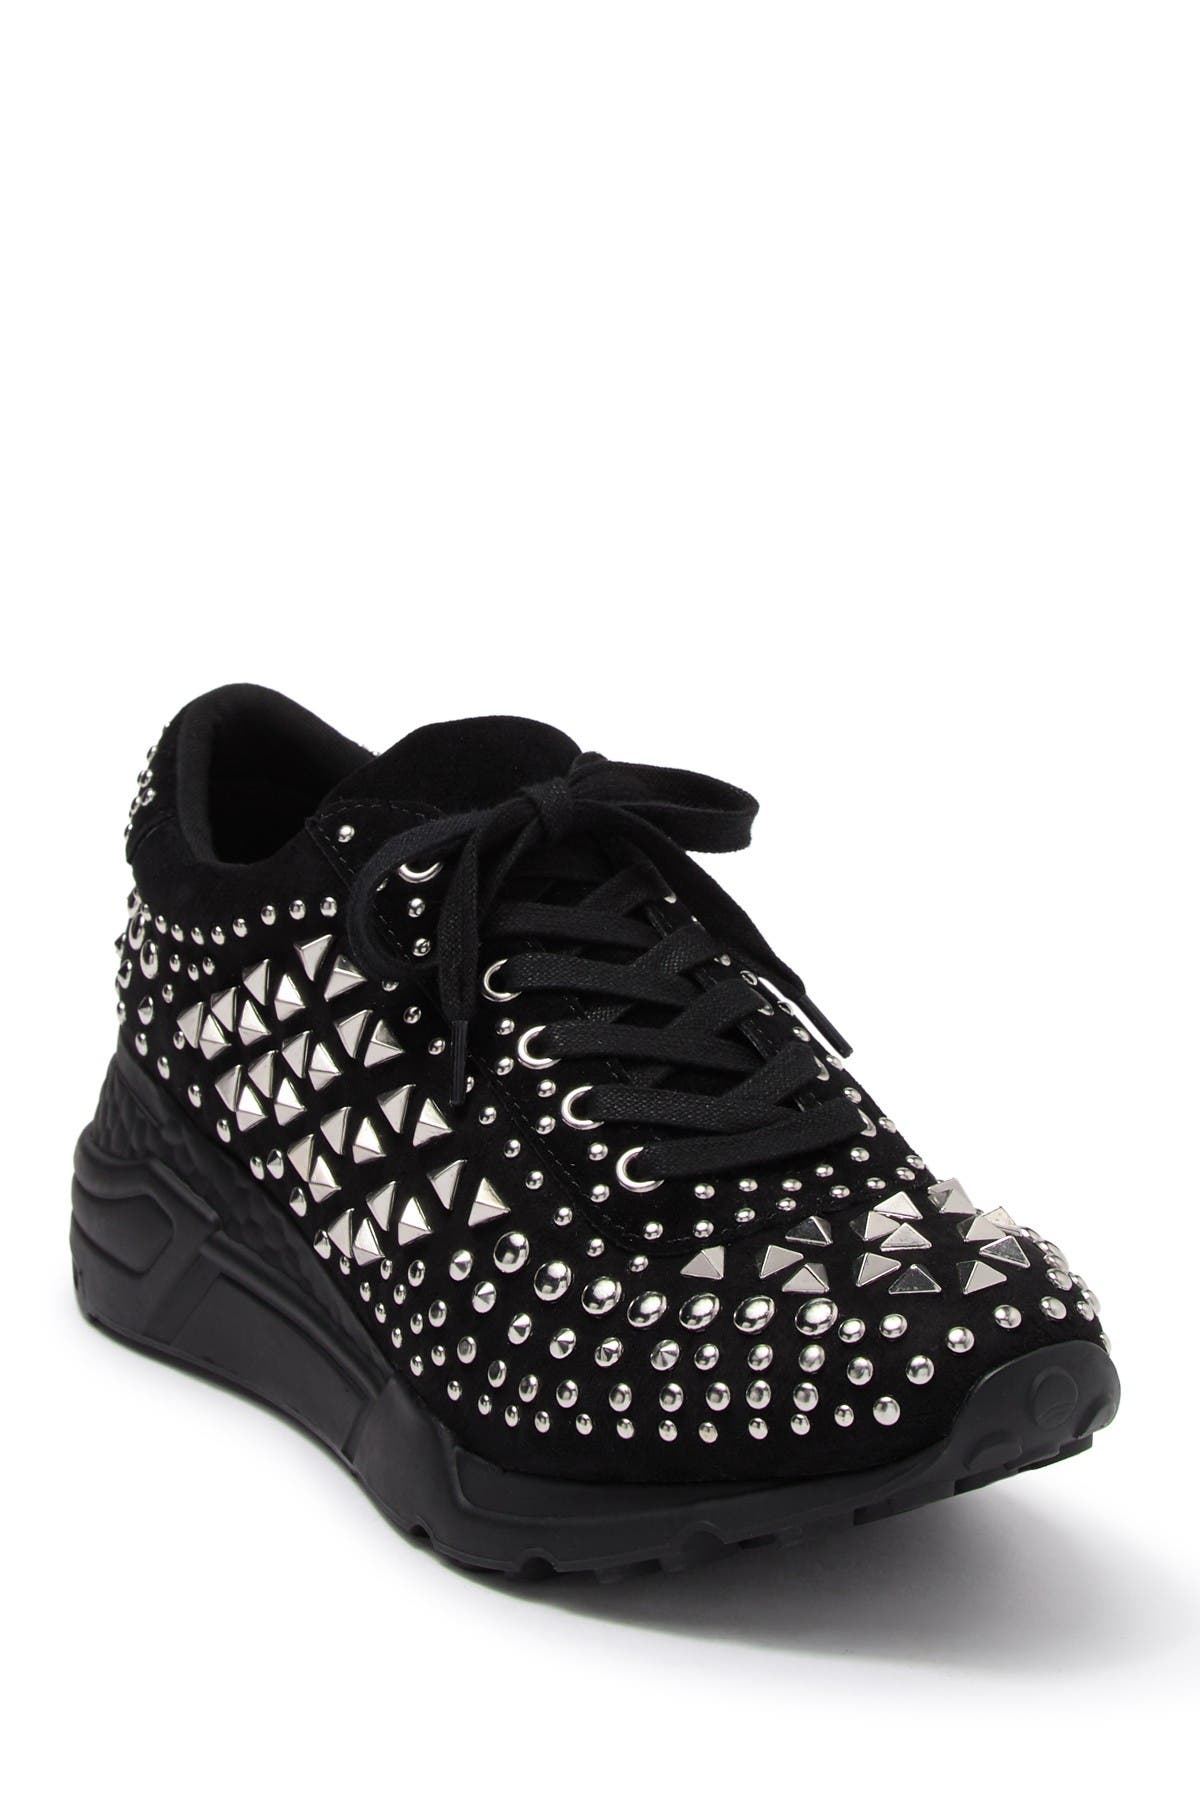 steve madden sneakers with studs